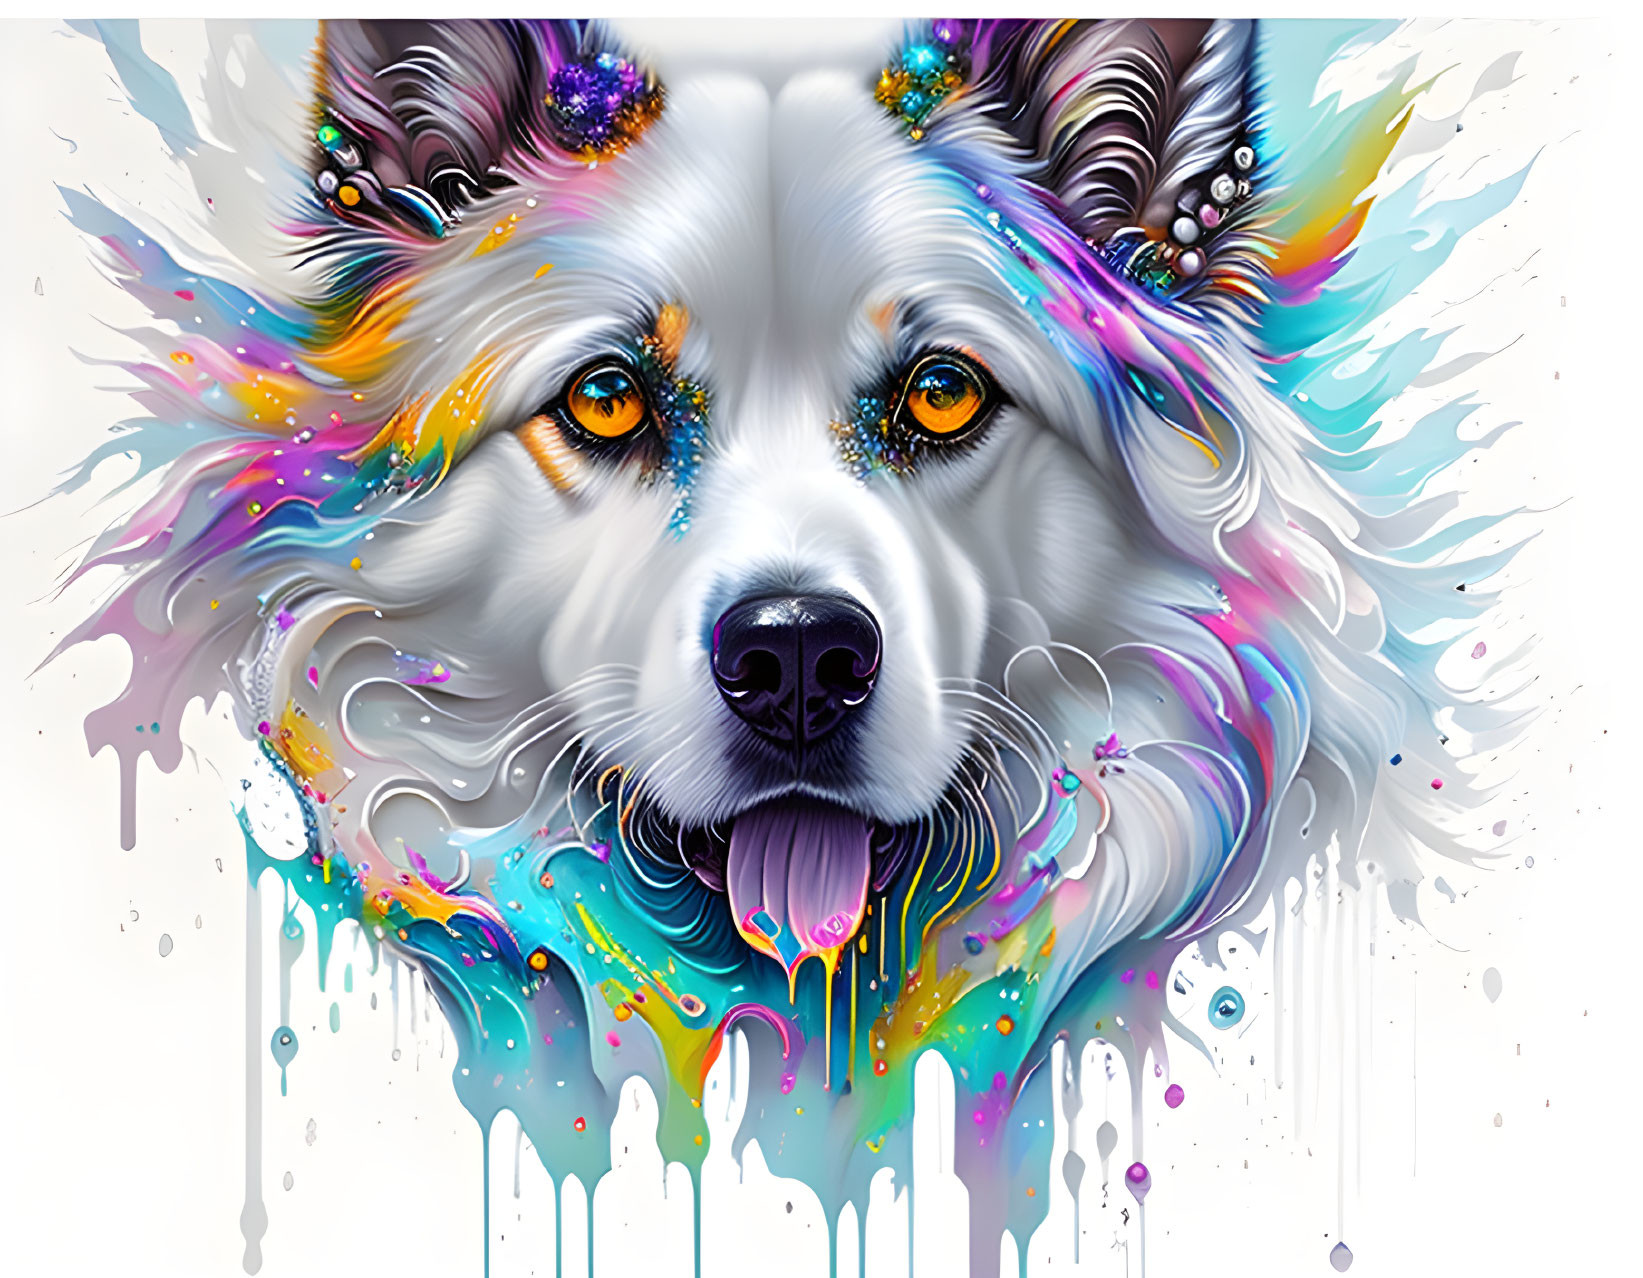 Colorful Abstract Dog Art with Paint Drips